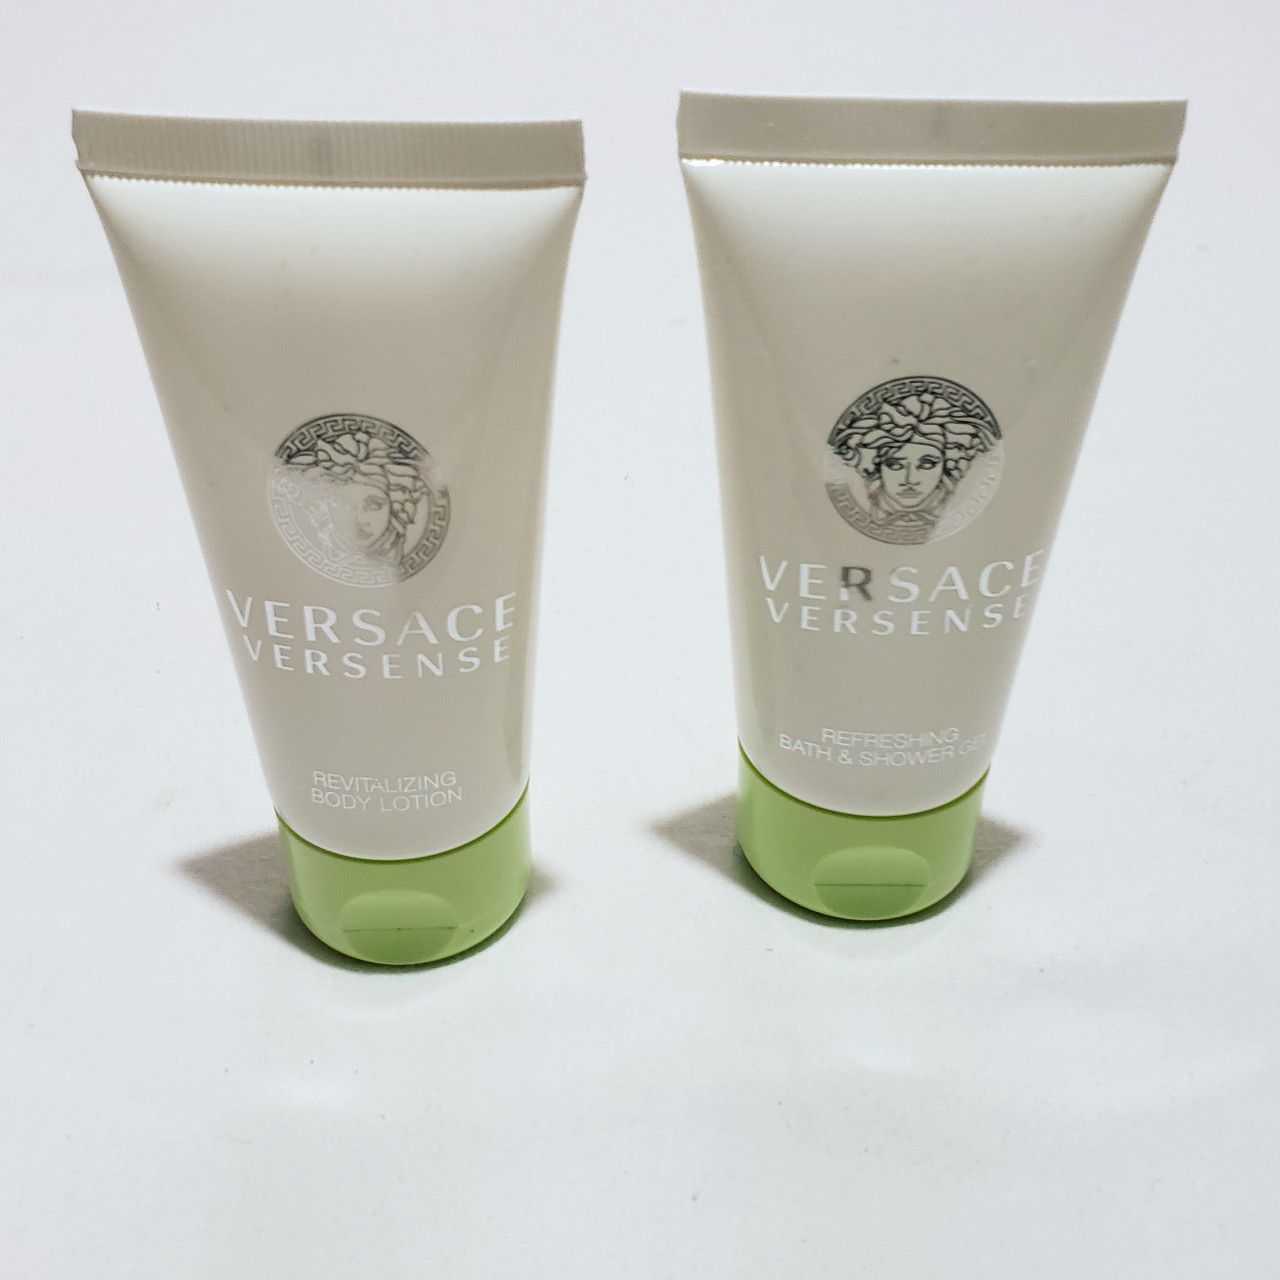 Authentic Versace Versense Body Lotion and Shower Gel